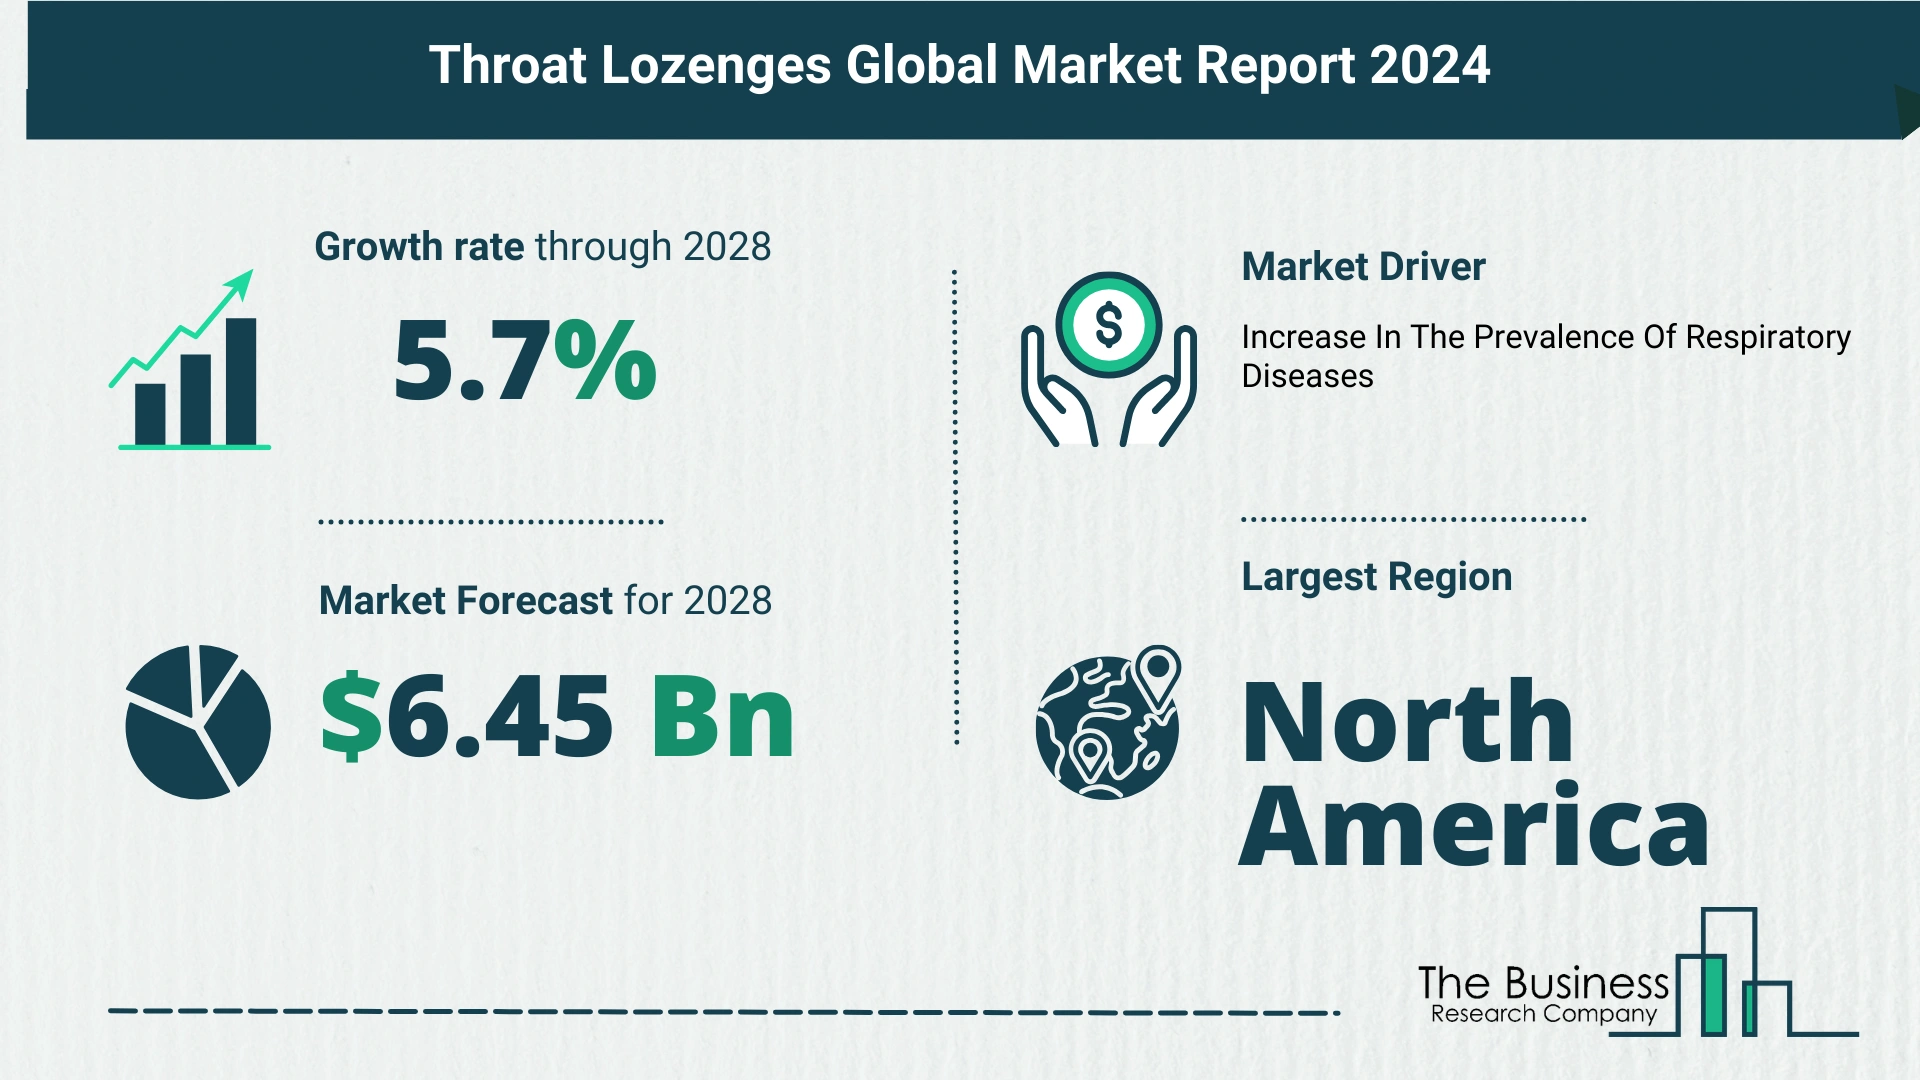 Key Insights On The Throat Lozenges Market 2024 – Size, Driver, And Major Players